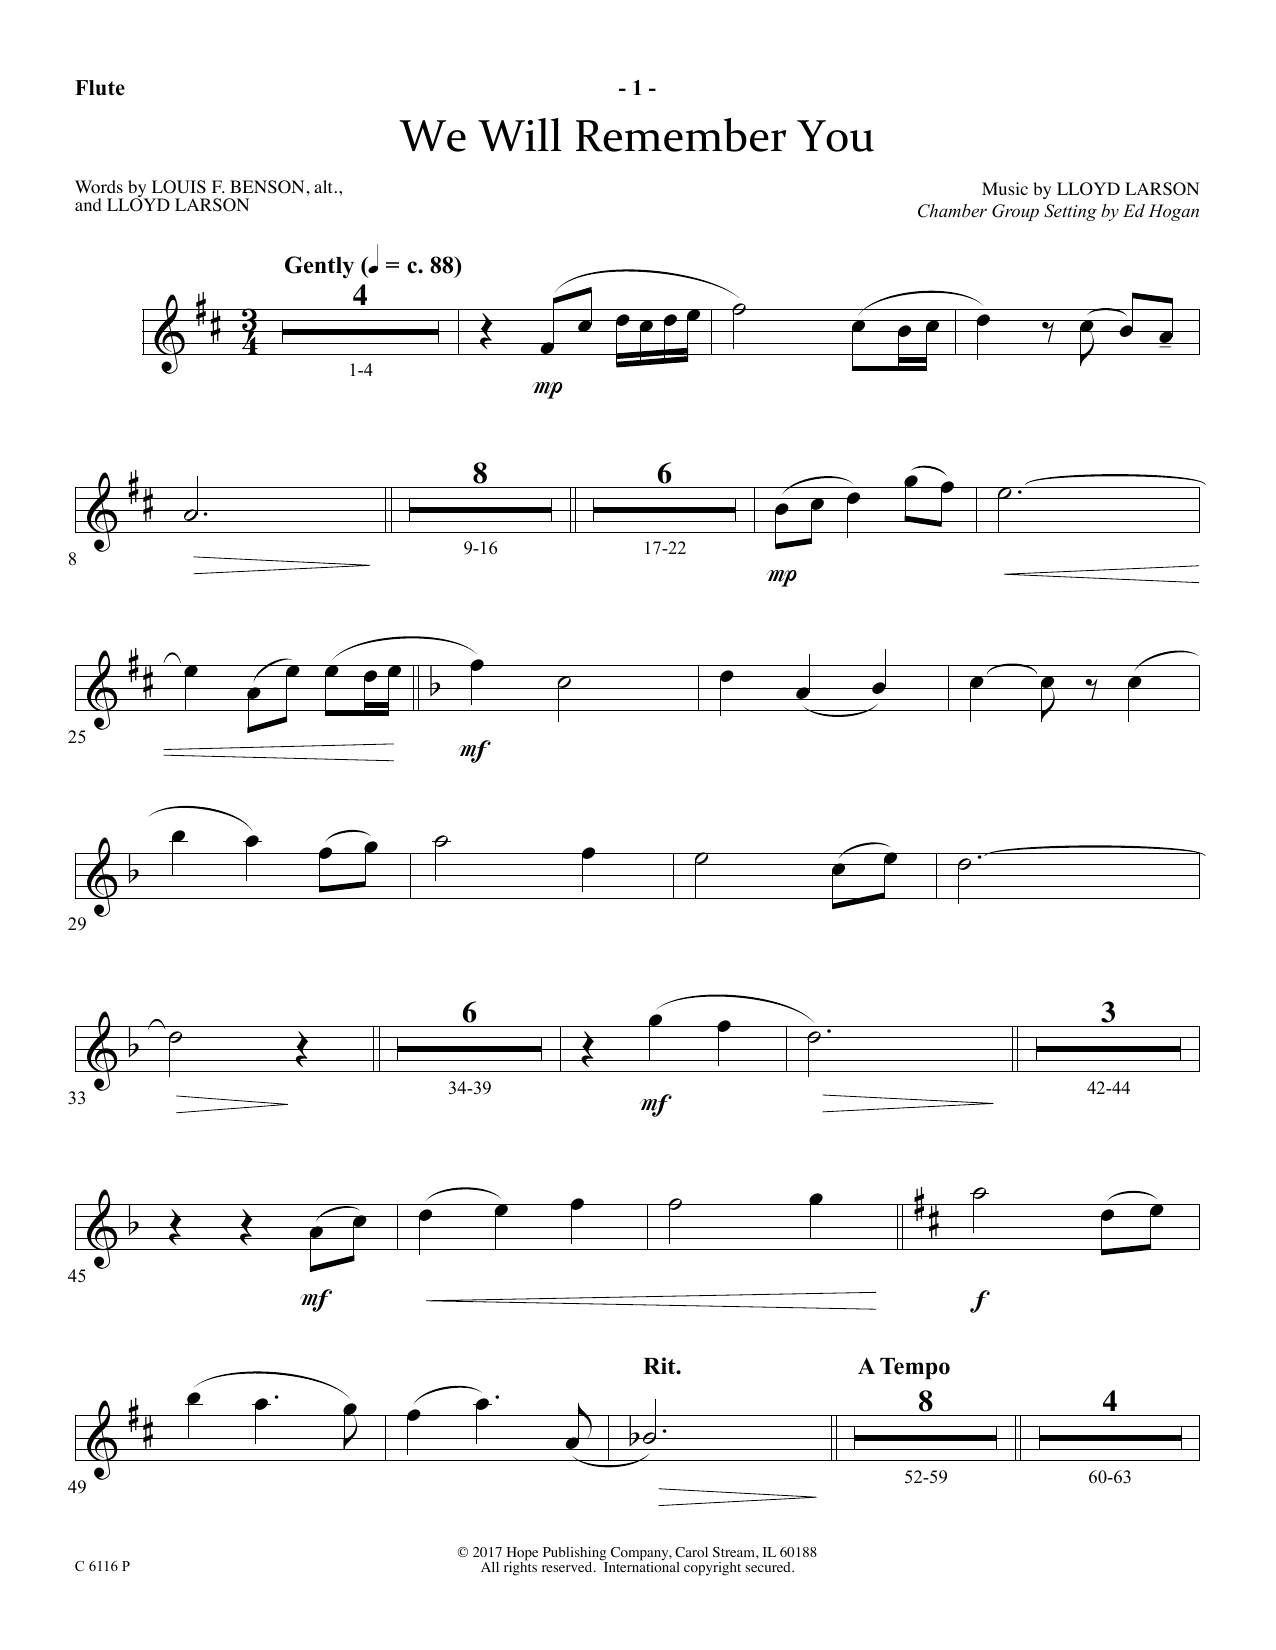 Download Ed Hogan We Will Remember You - Flute Sheet Music